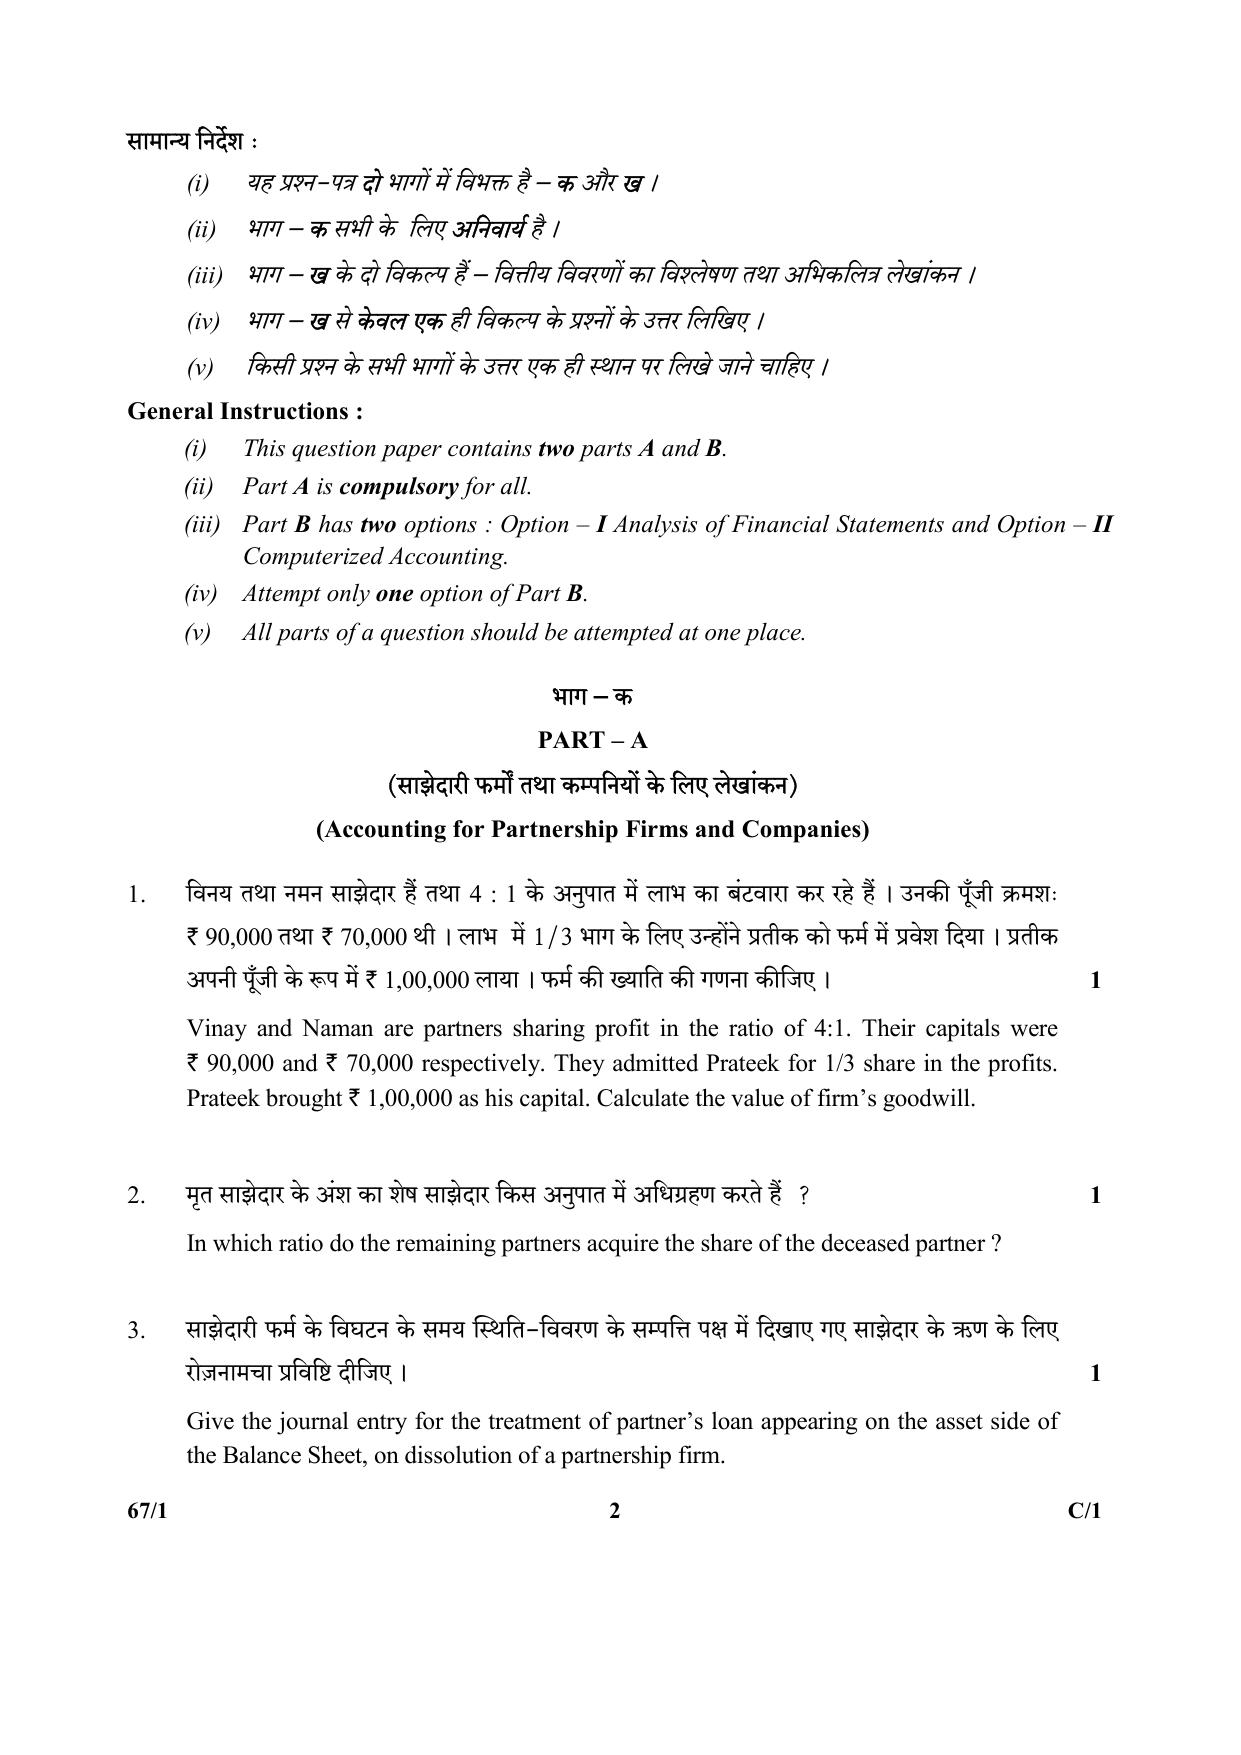 CBSE Class 12 67-1  (Accountancy) 2018 Compartment Question Paper - Page 2